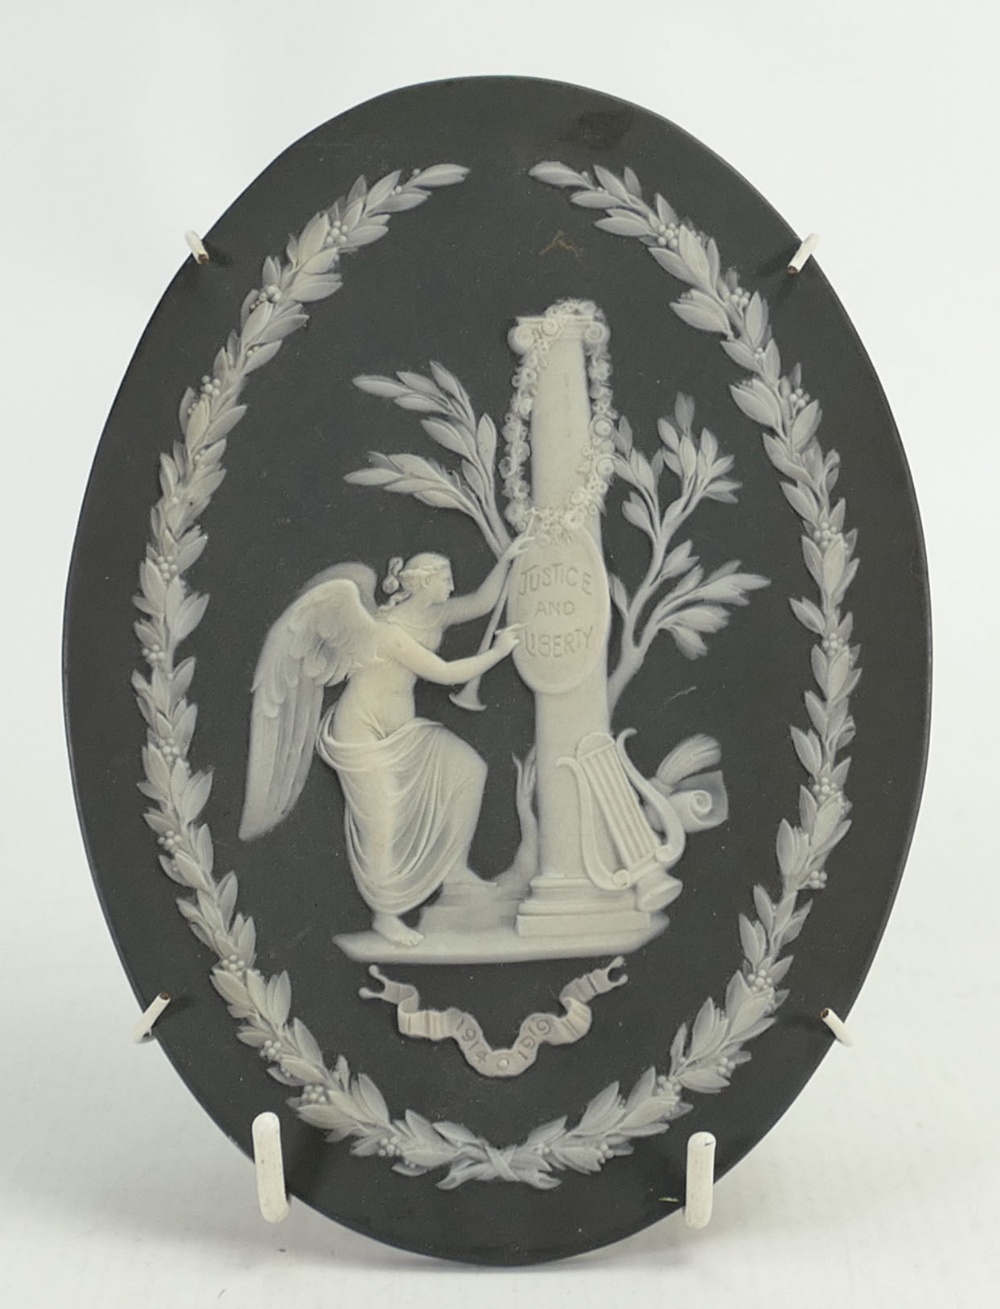 Wedgwood black Jasperware oval plaque 'Justice and Liberty 1914-1919', height 18cm.